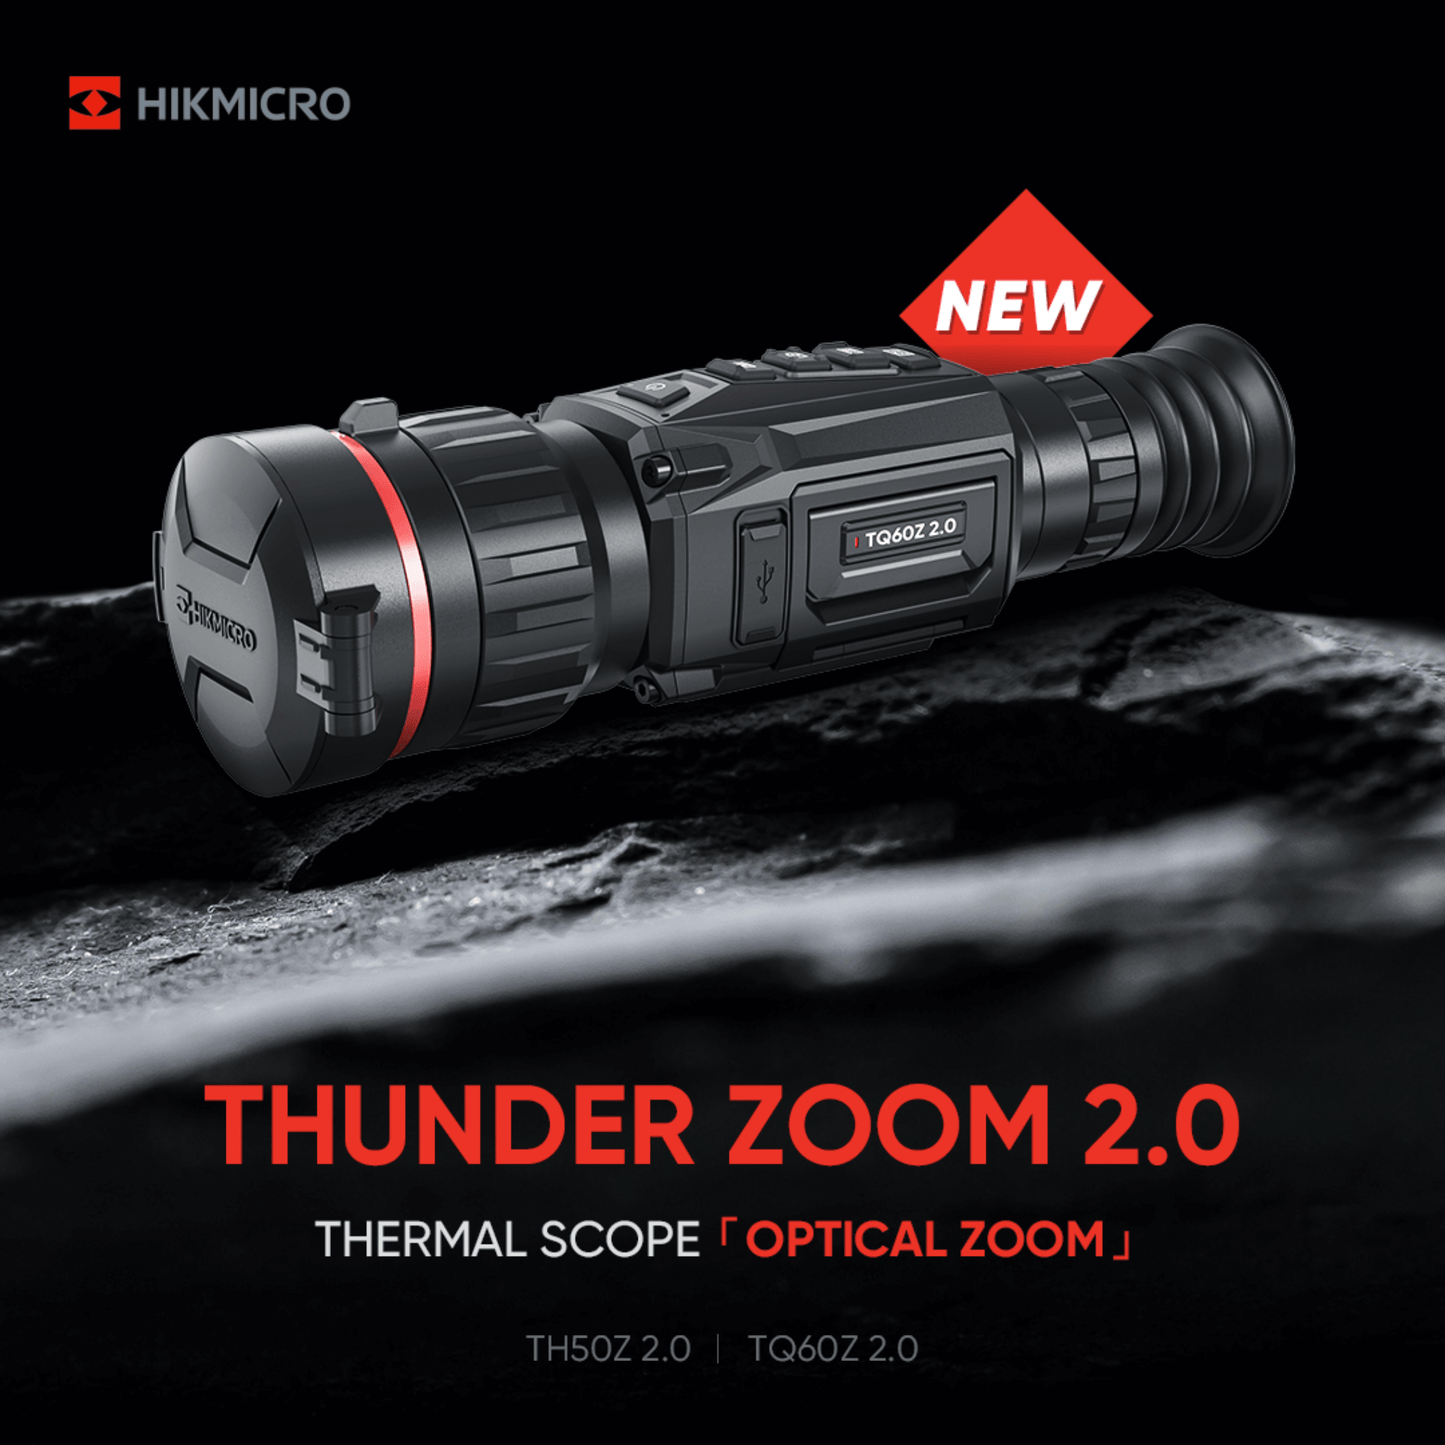 HikMicro Thunder Zoom TH50Z 2.0 Is a thermal scope with optical zoom on the thermal lens